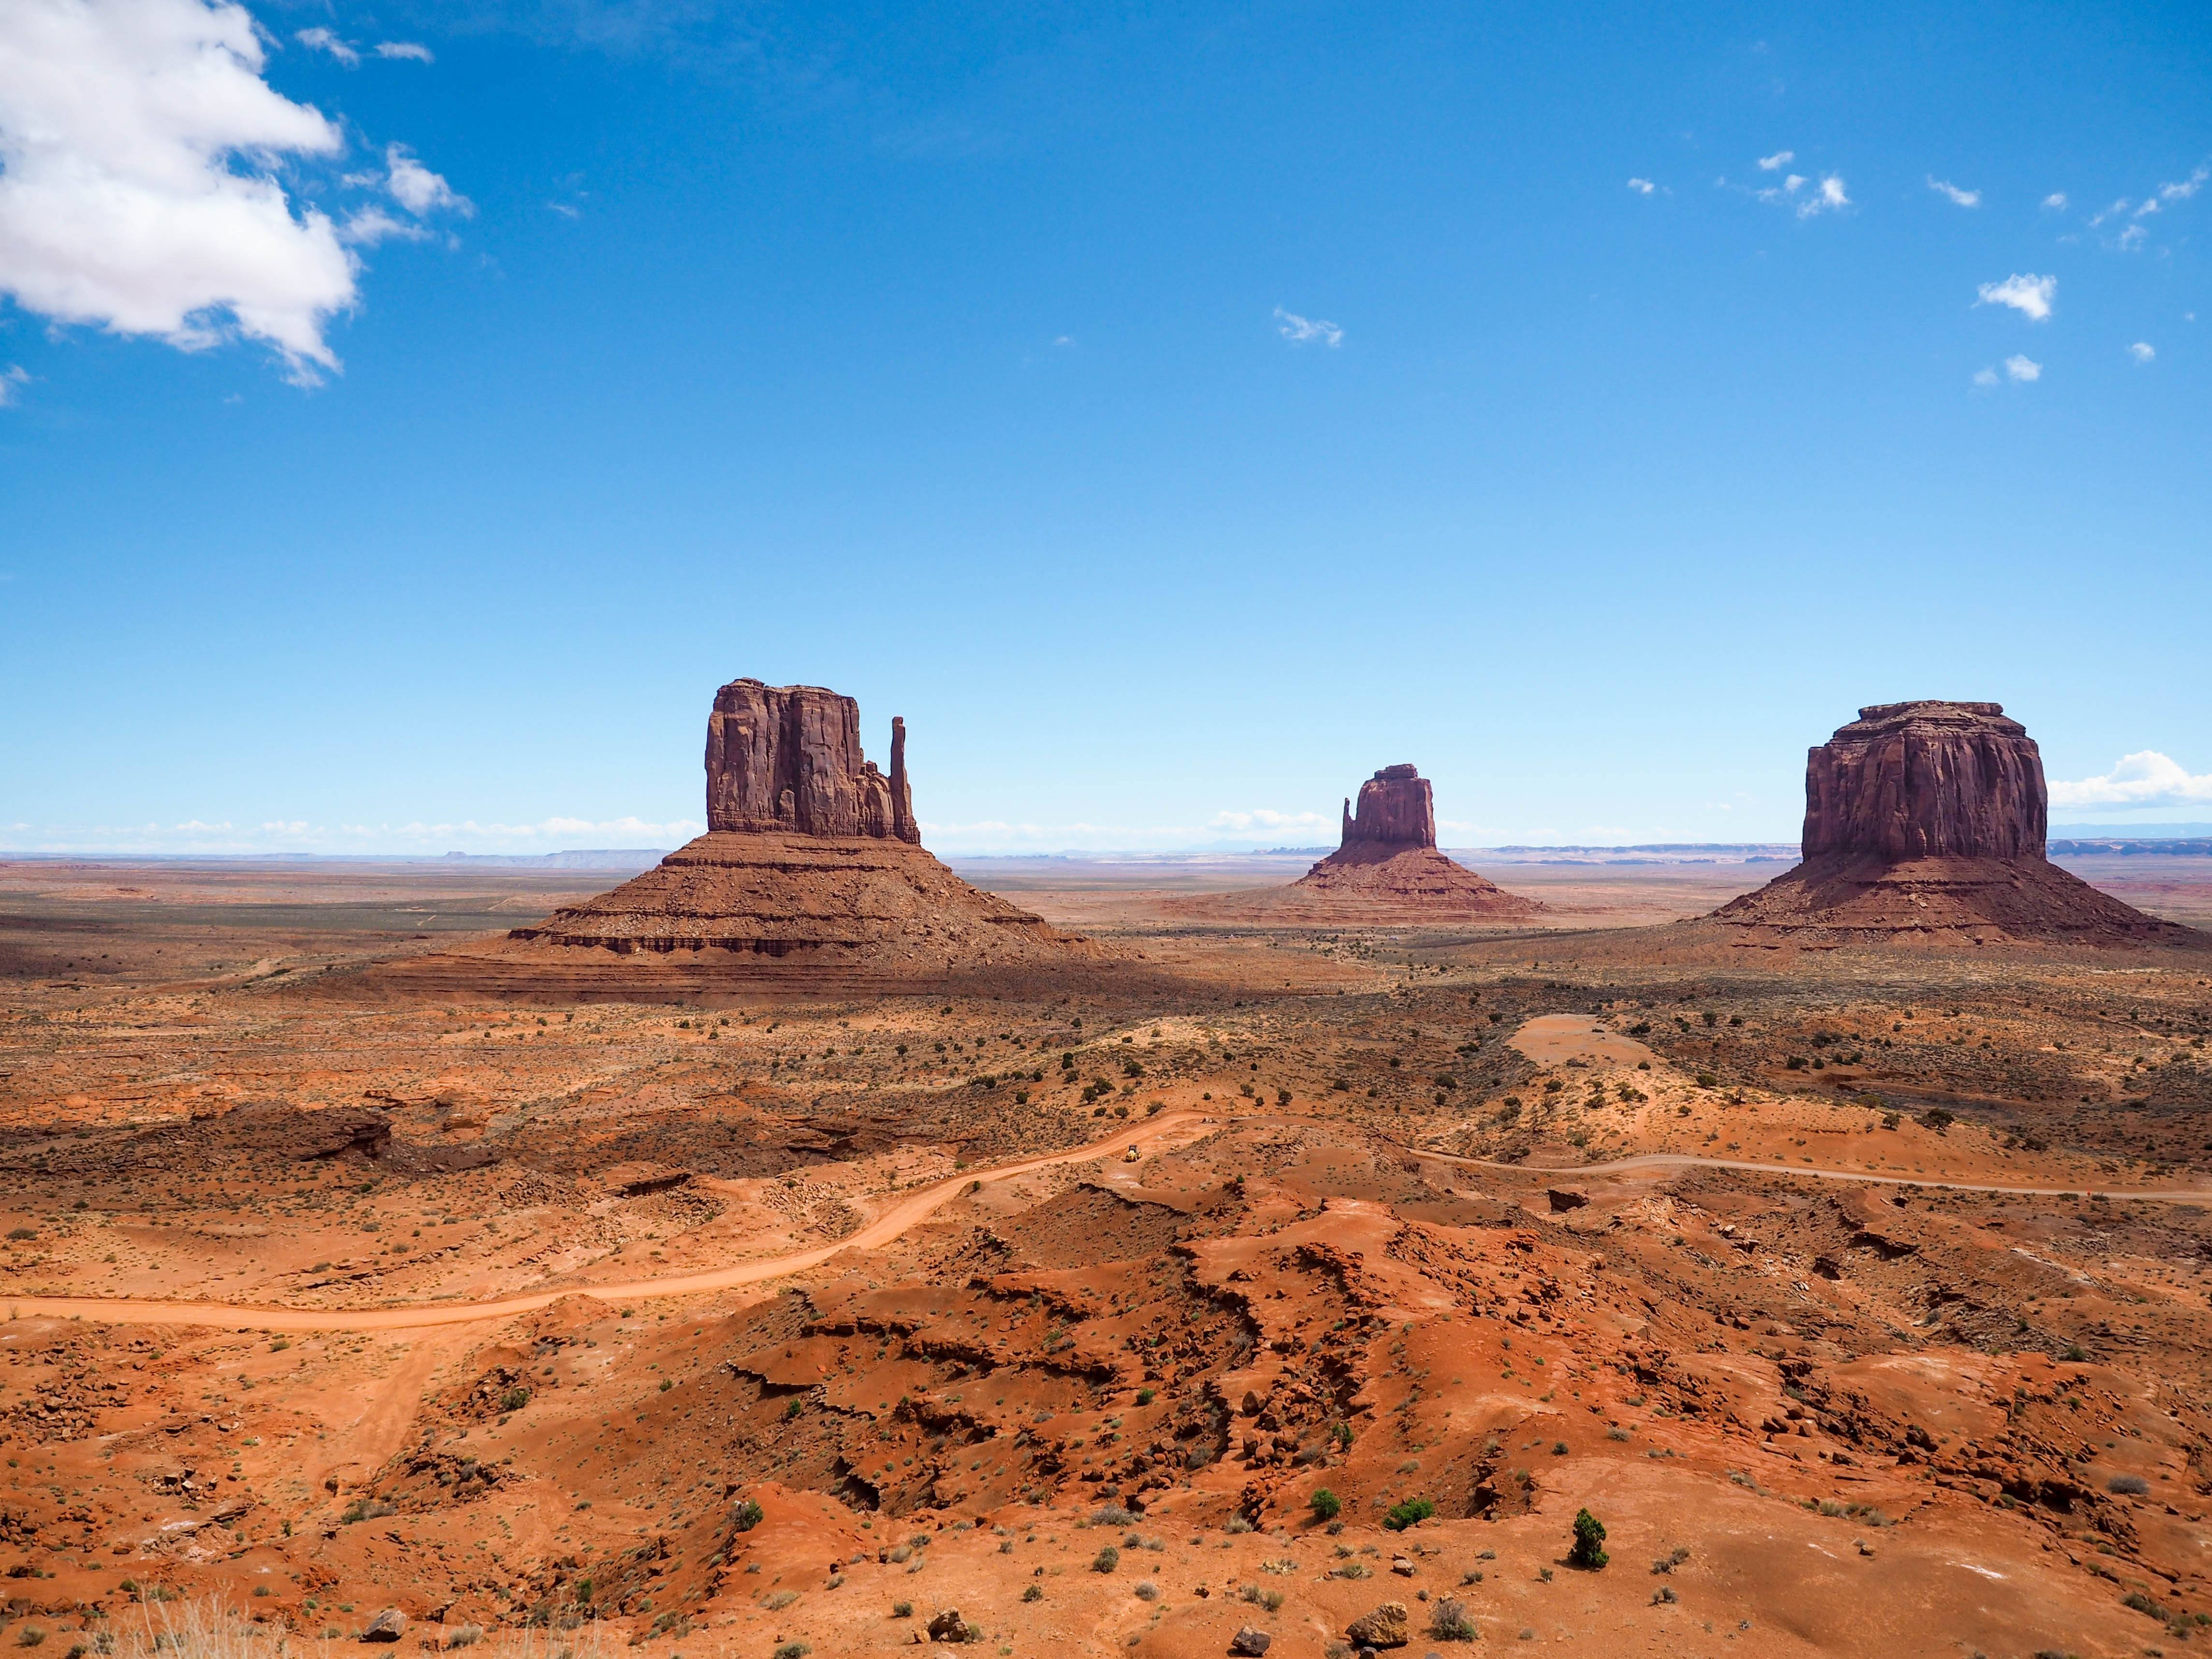 Visiting Monument Valley